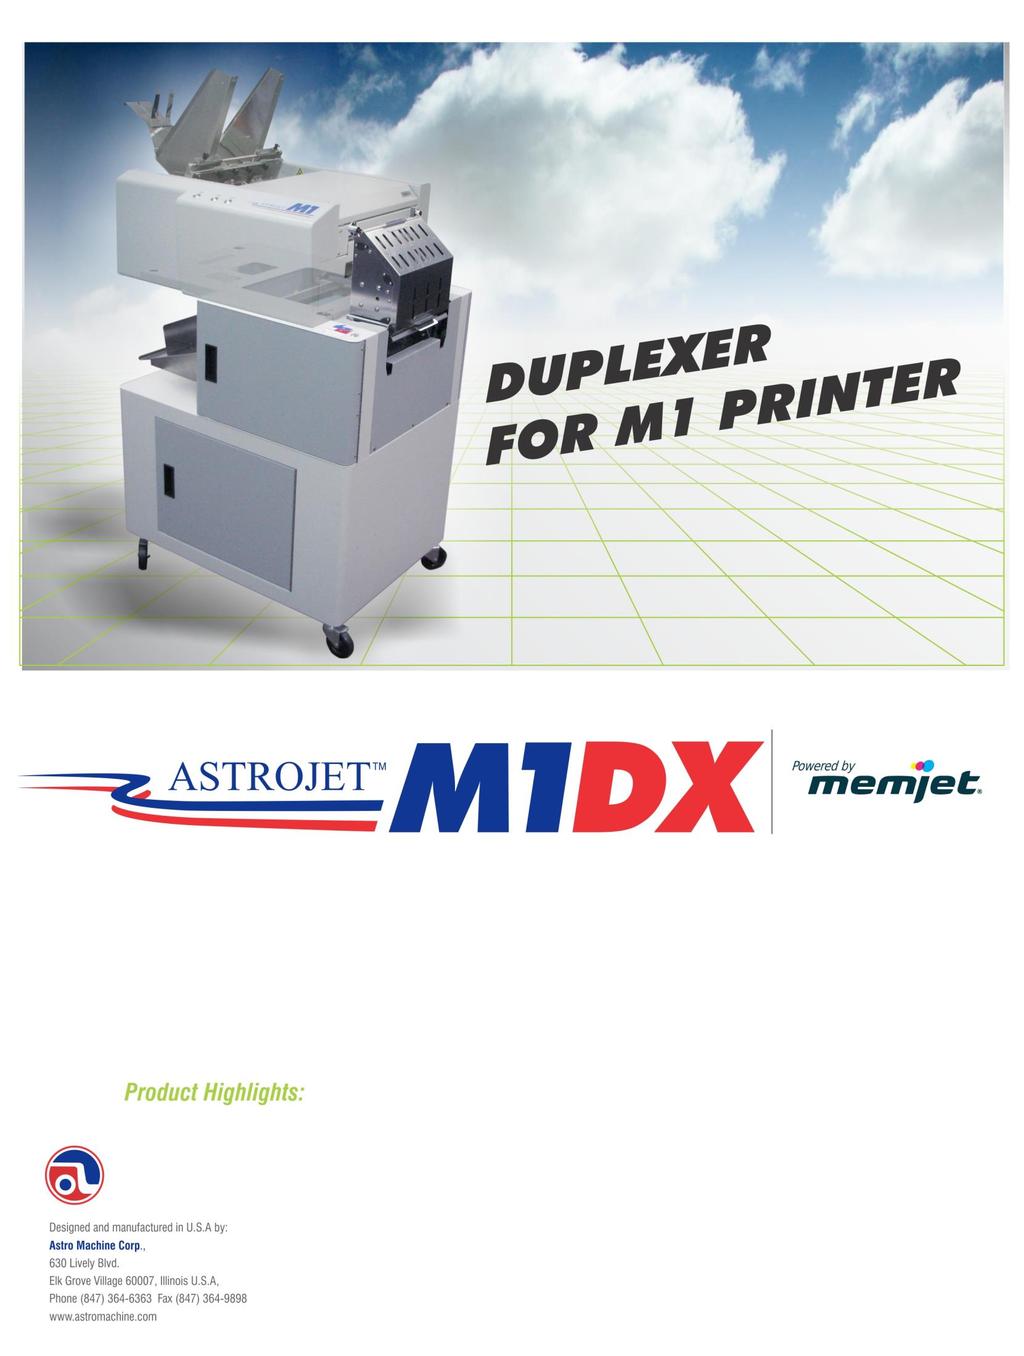 Converts your standard M1 Printer into a full color Duplex Printer! Print quality up to 1600 dpi for sharp graphic images in full process color.